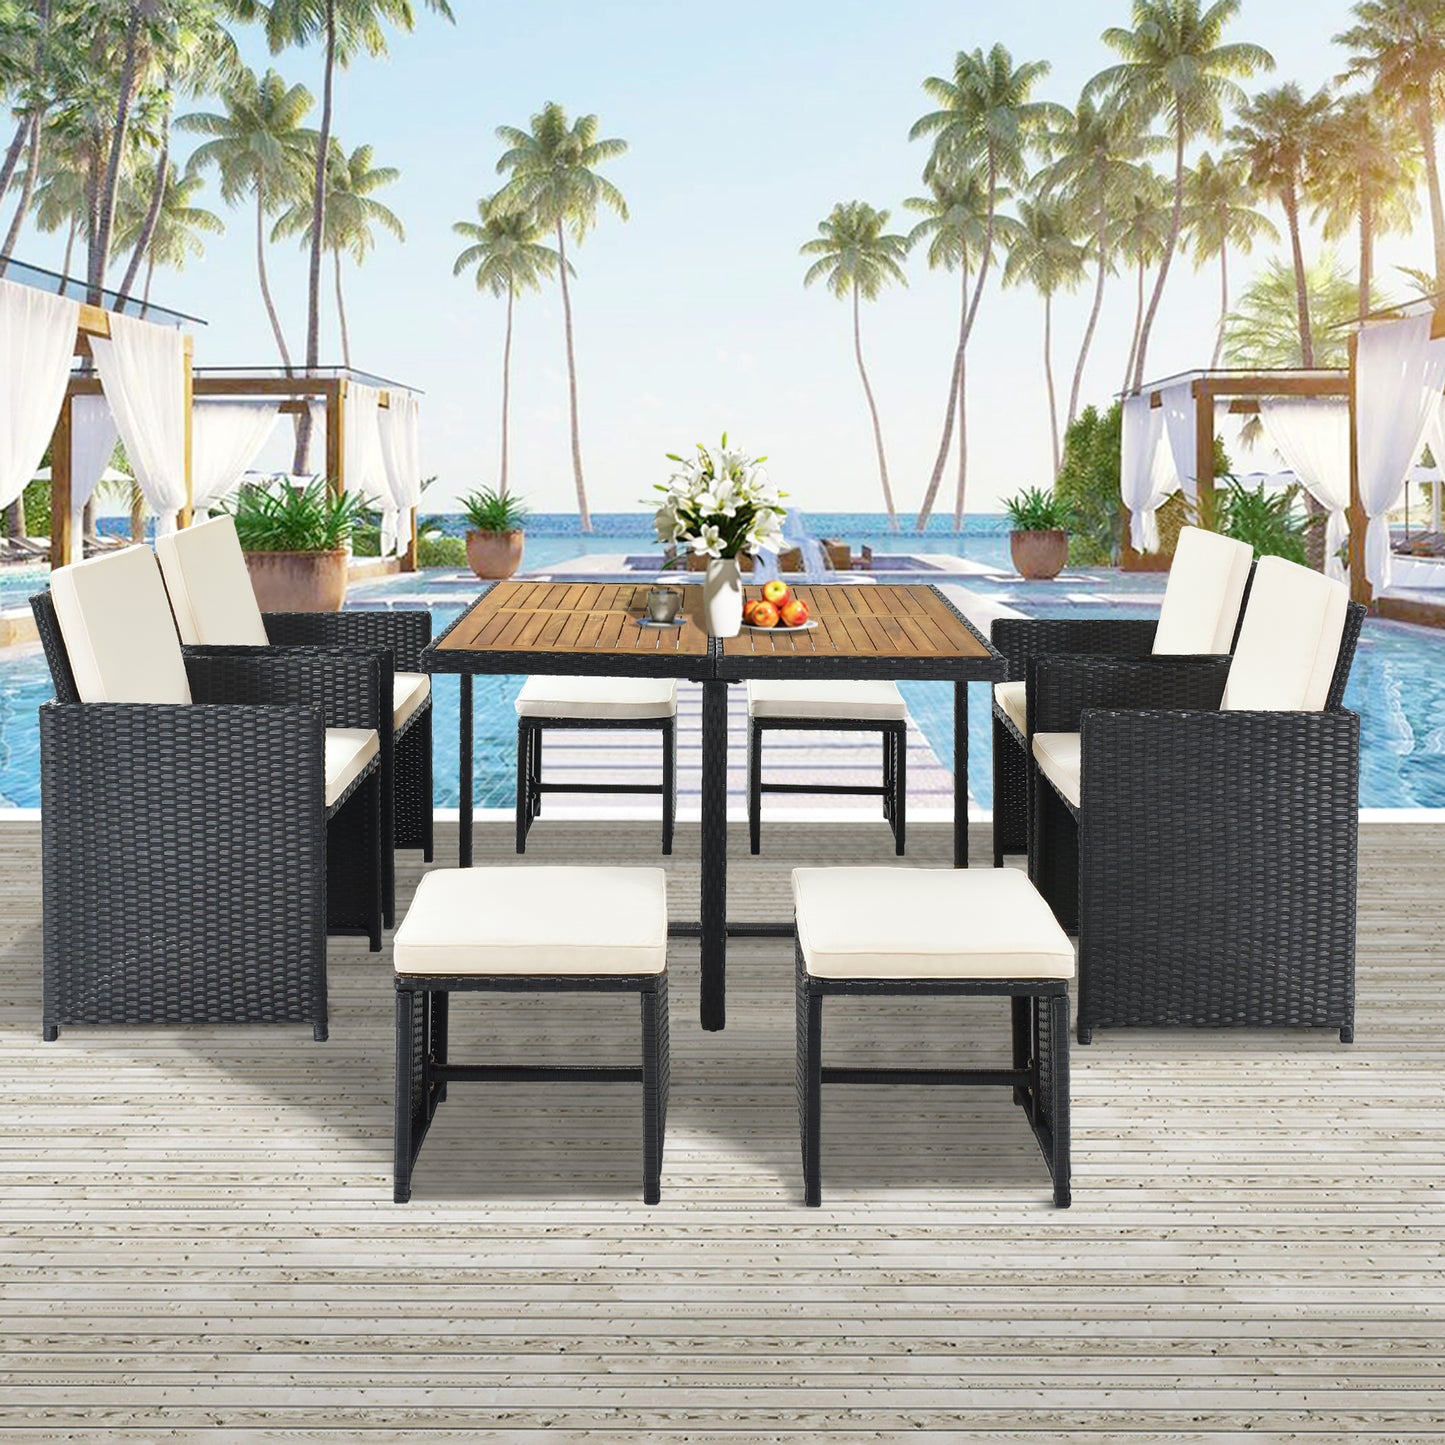 Patio Dining Sets 9 Pieces, Outdoor Table and Chairs with Tempered Glass Coffee Table and Ottoman, Wicker Patio Dining Sets for Backyard Deck Poolside Garden, LJ3954